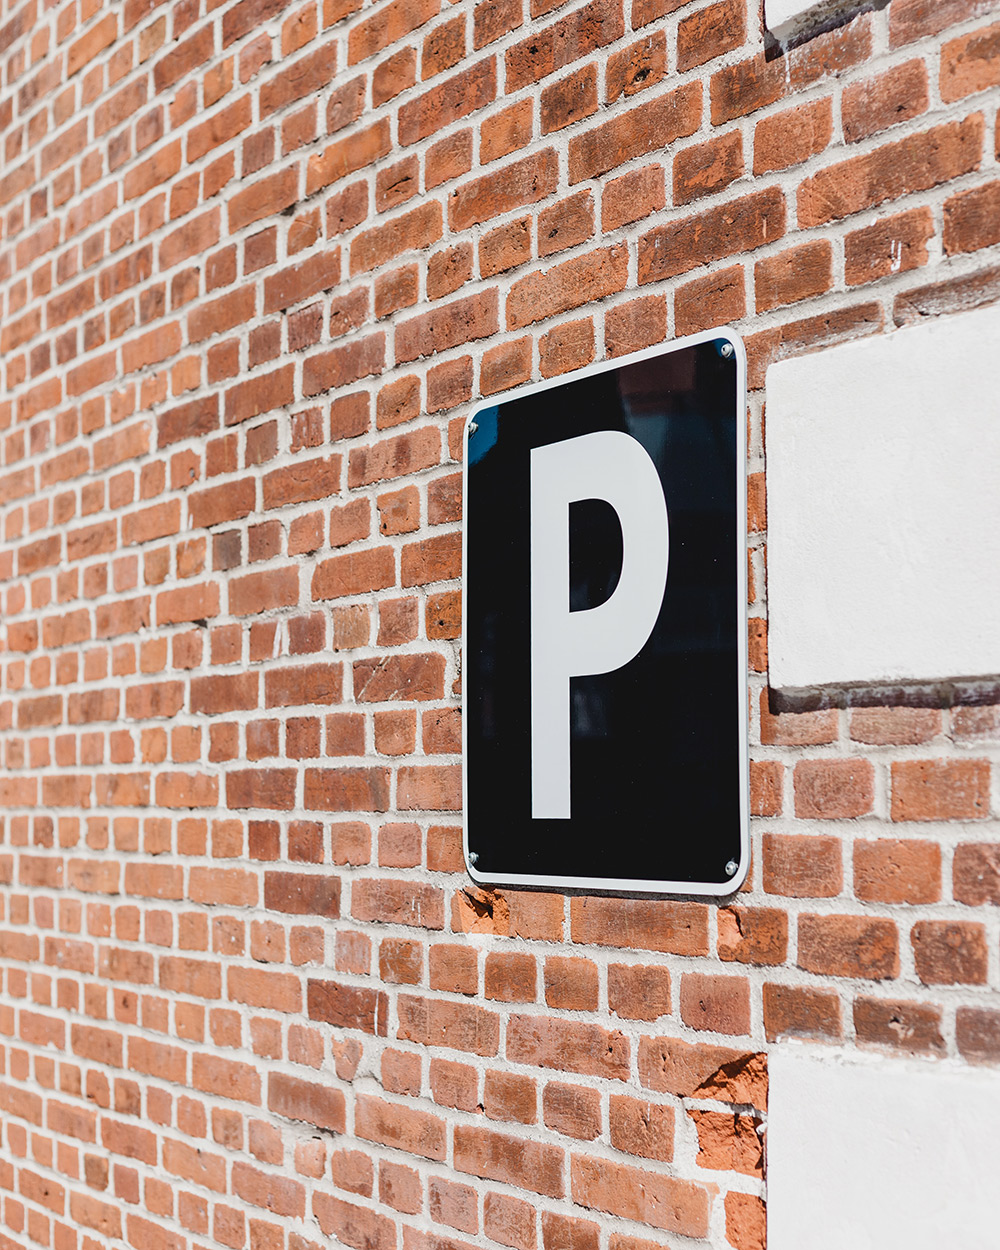 Parking Sigs For Business in Austin, TX - Georgetown Sign Company